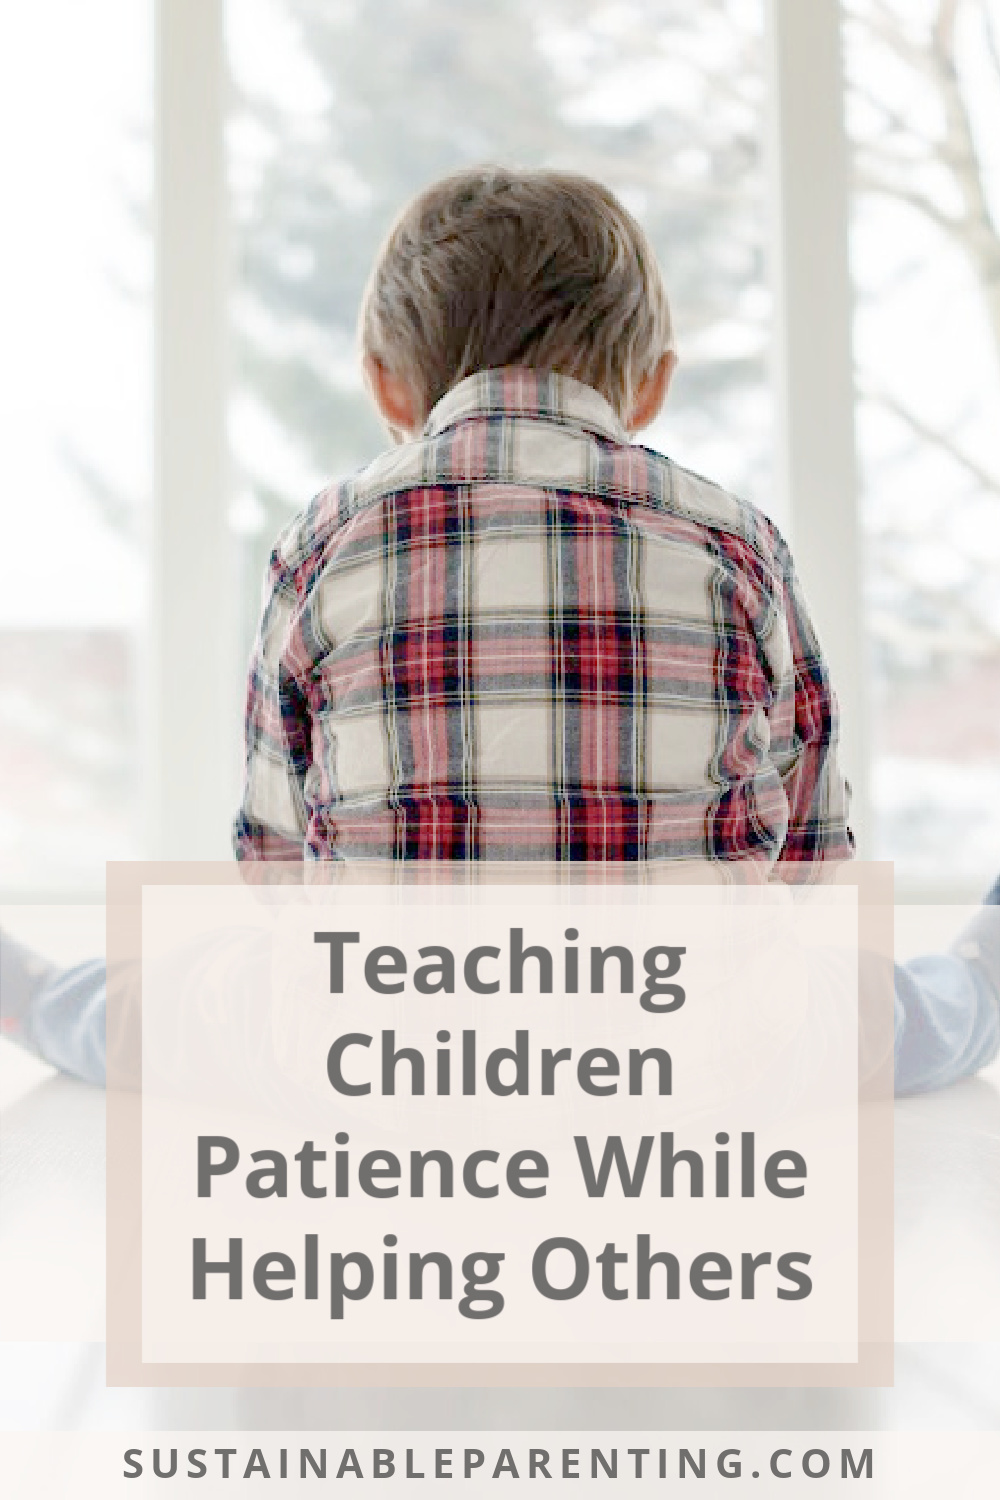 Teaching Children Patience While Helping Others